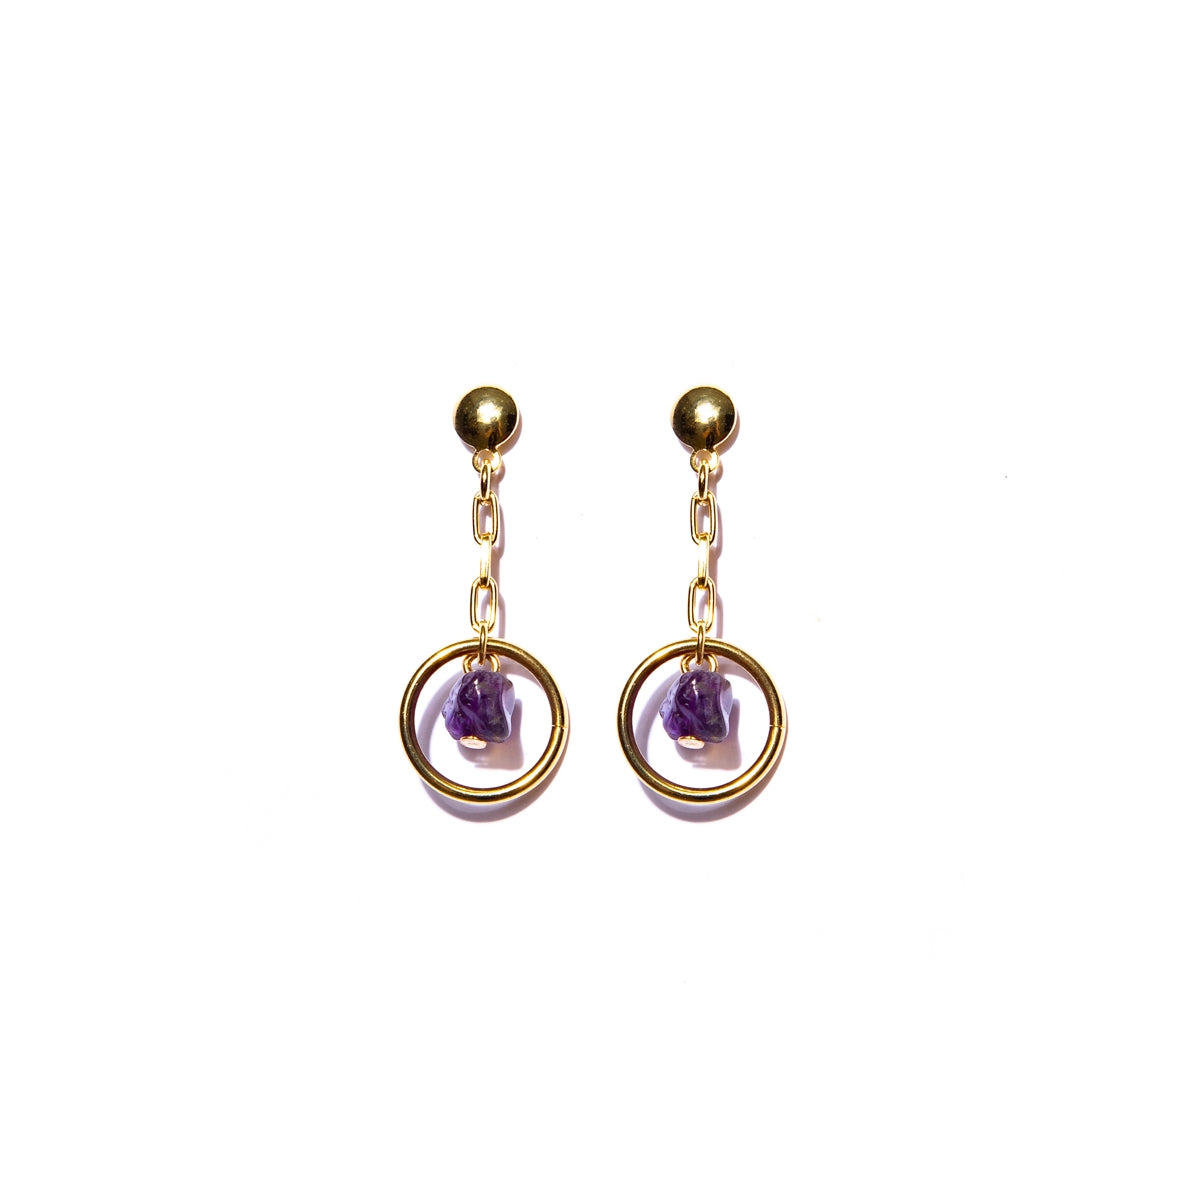 Earring with delicate amethyst stone in gravel and gold-plated metals